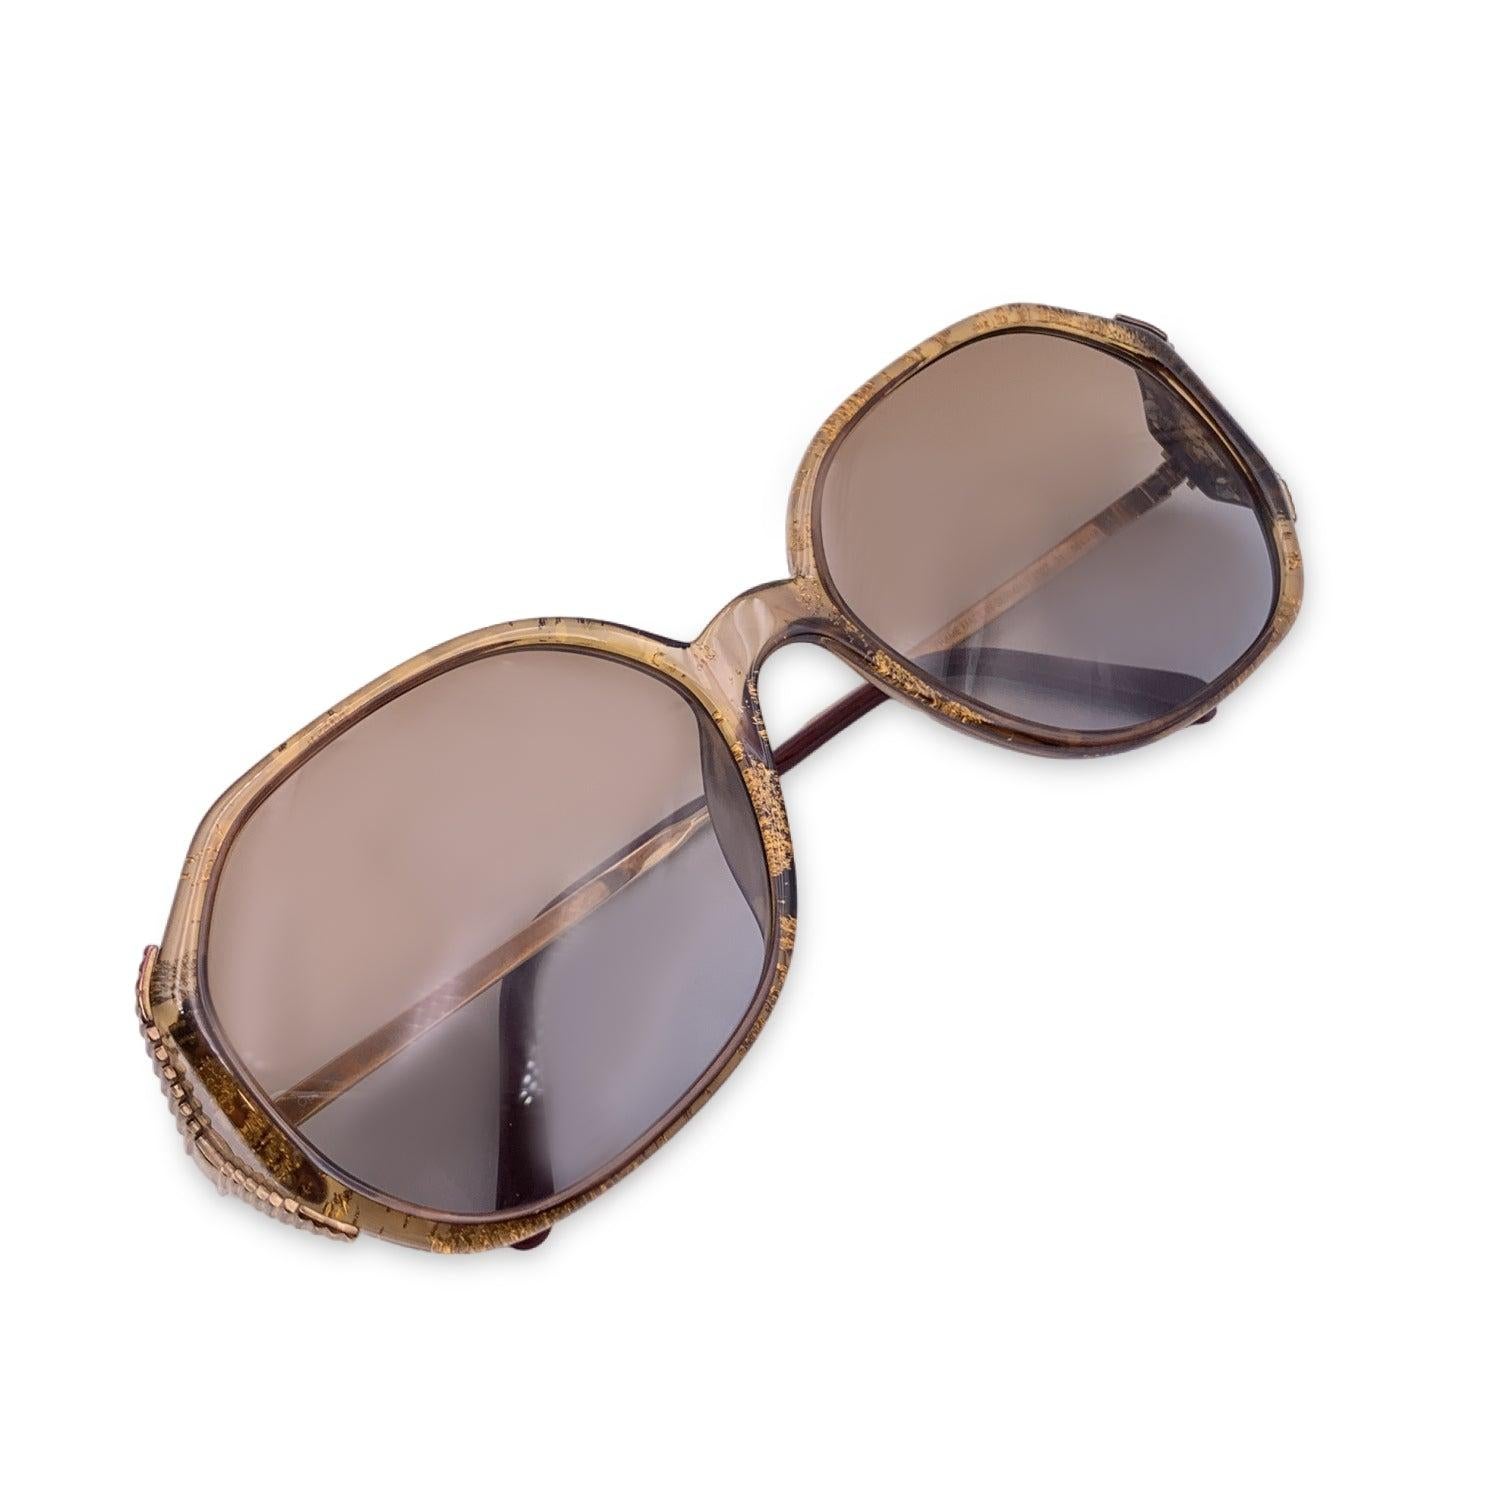 Vintage Christian Dior Women Sunglasses, Mod. 2527 31 Optyl. Size 56/18 130mm. Light brown acetate frame with gold details on the sides of Gold temples. CD logo on temples . 100% Total UVA/UVB protection. Brown to blue gradient lenses. Condition A+